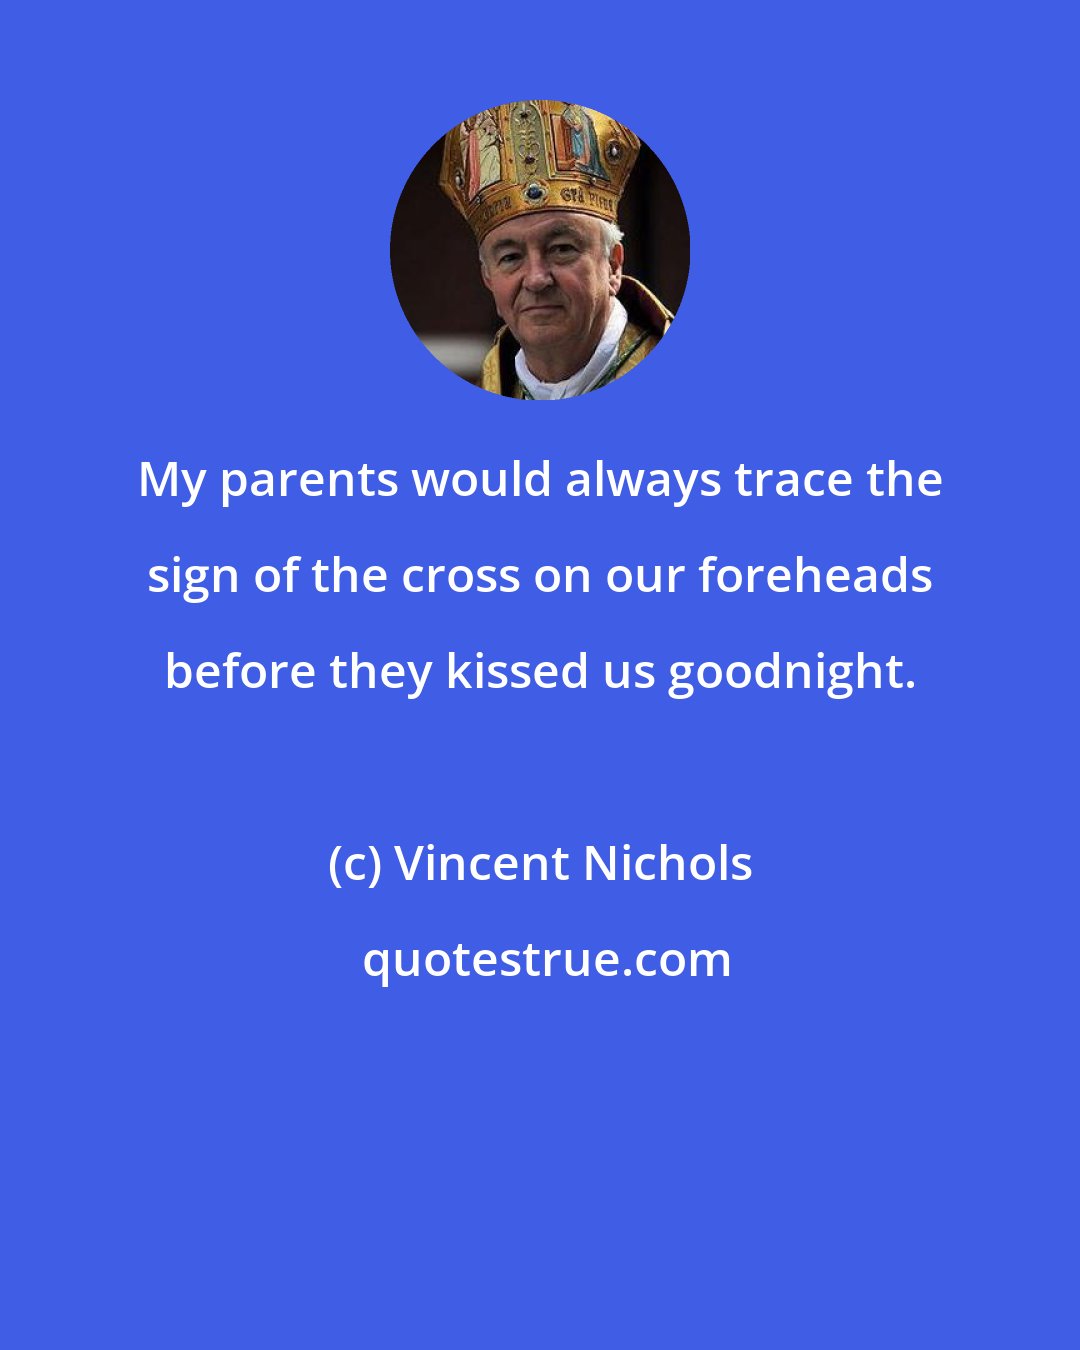 Vincent Nichols: My parents would always trace the sign of the cross on our foreheads before they kissed us goodnight.